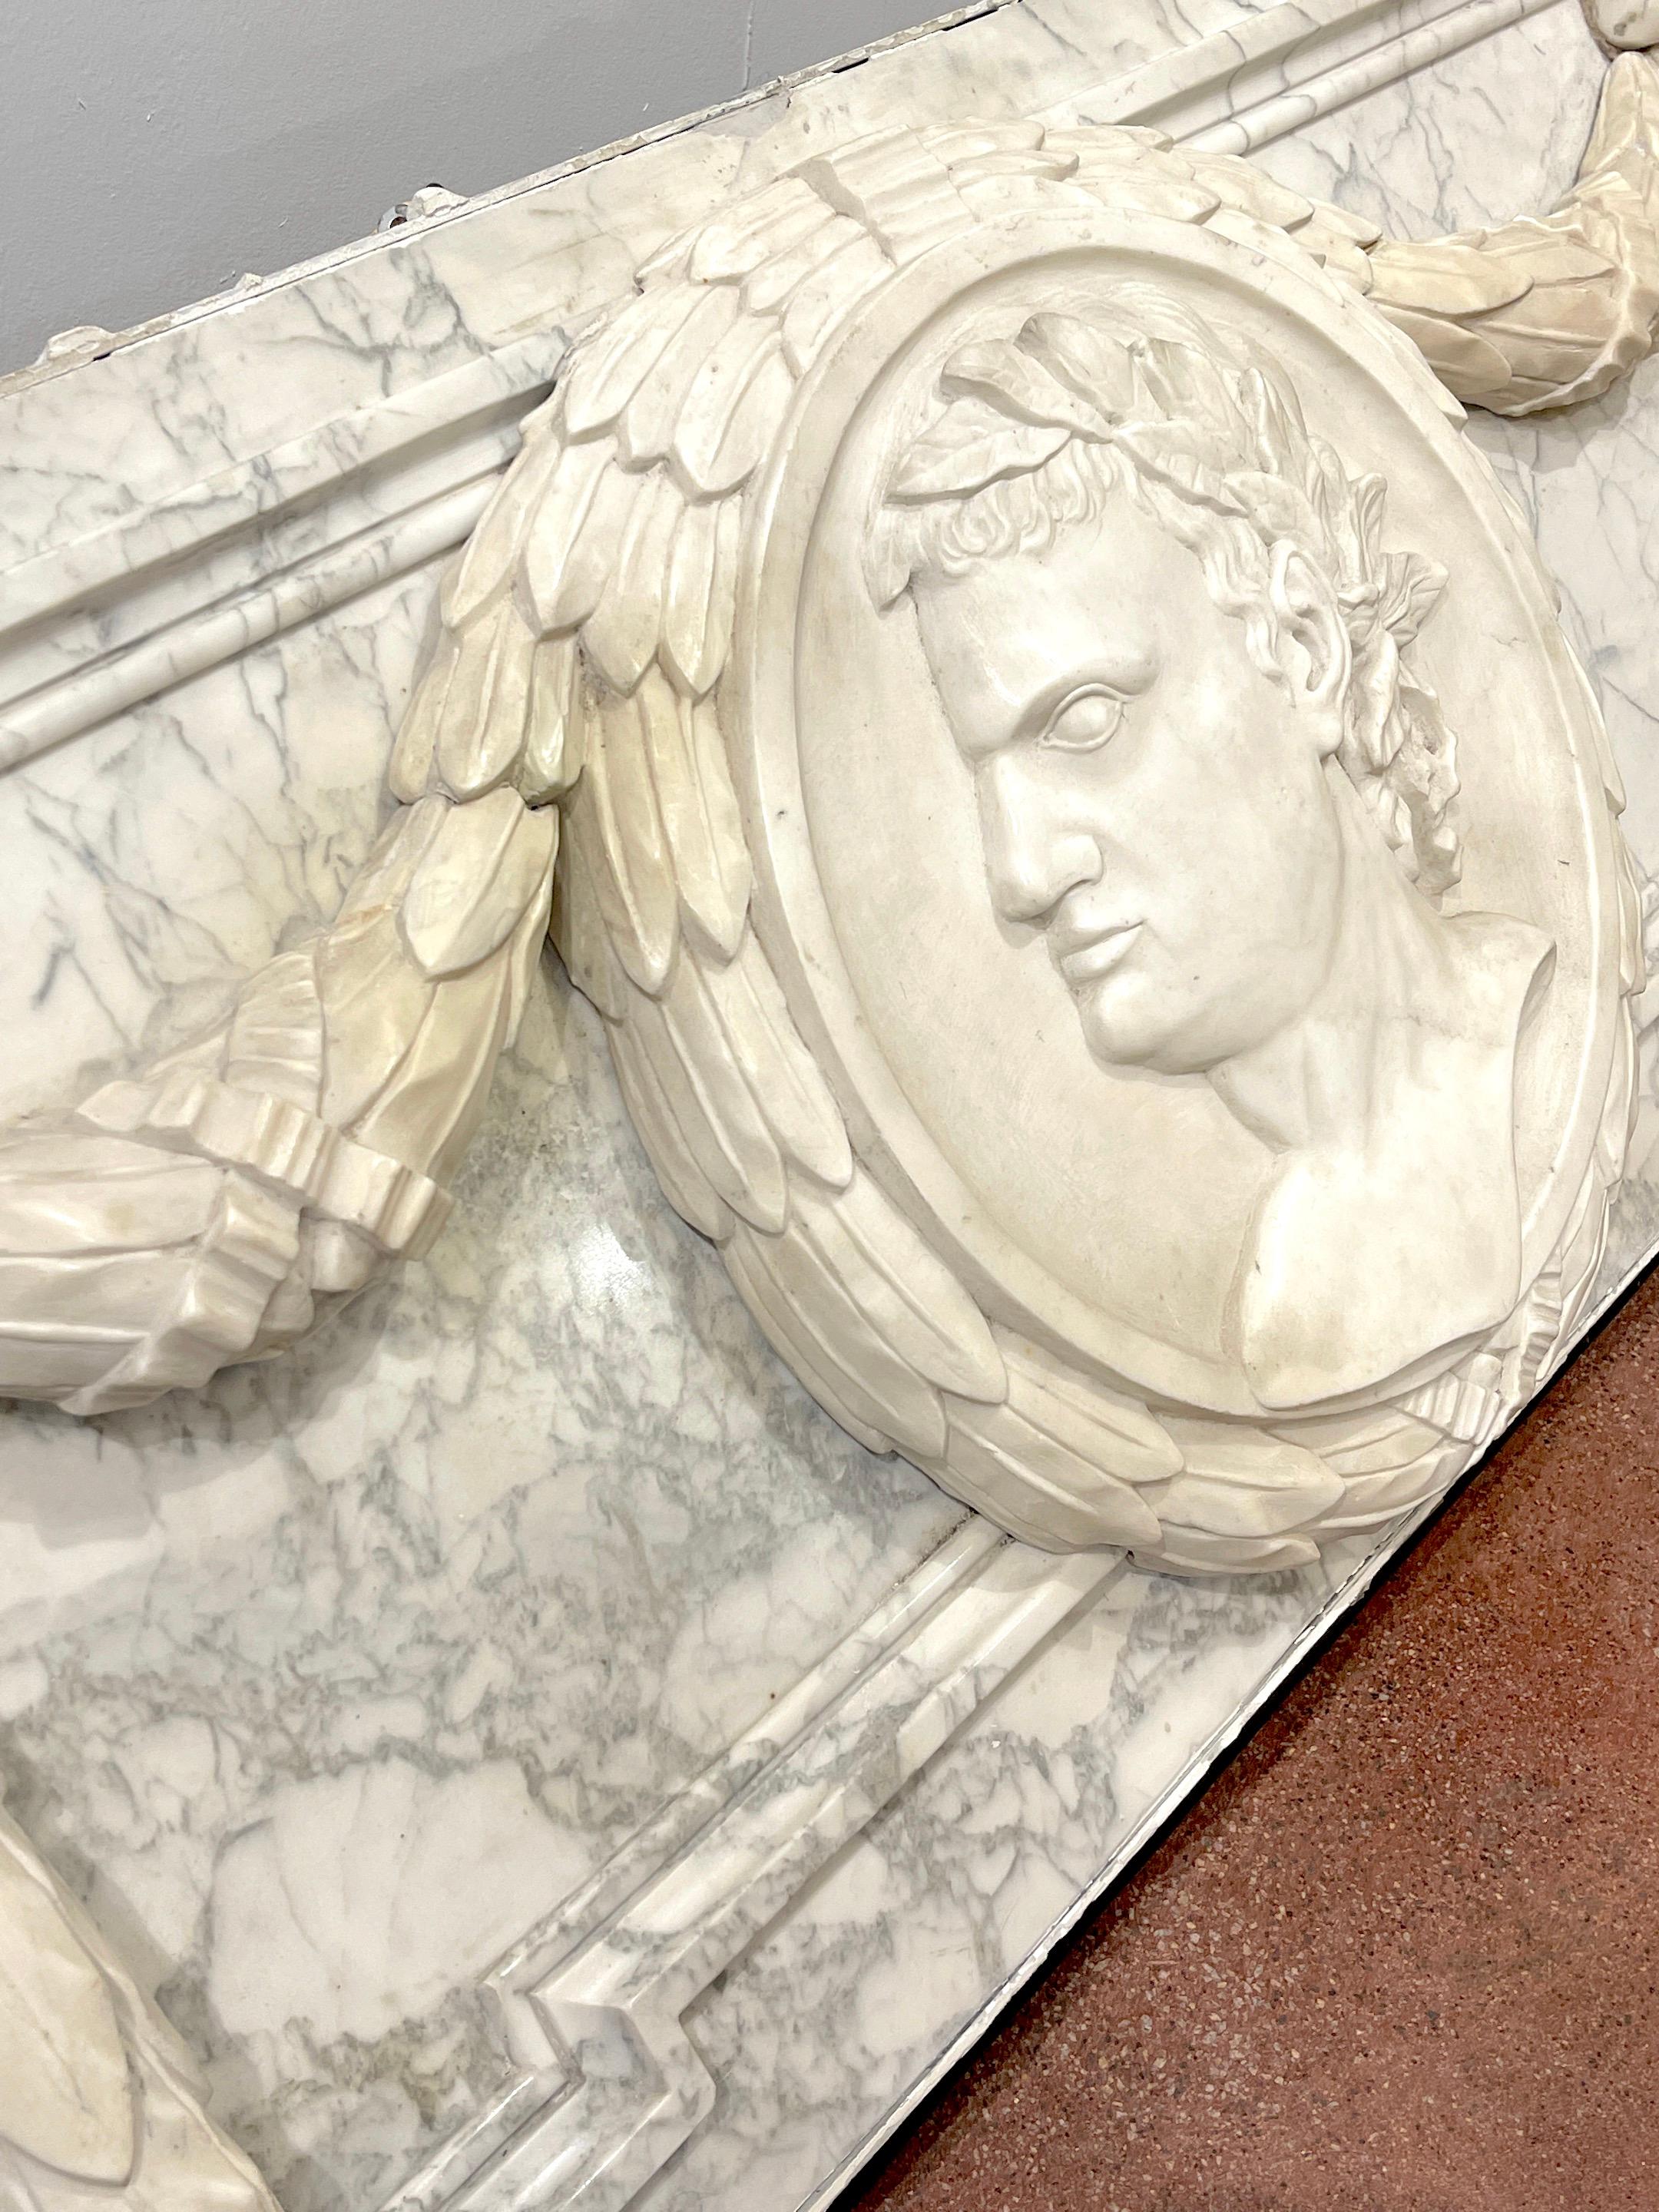 19th Century Italian Carved Marble Architectural Frieze Sculpture of Caesar For Sale 3